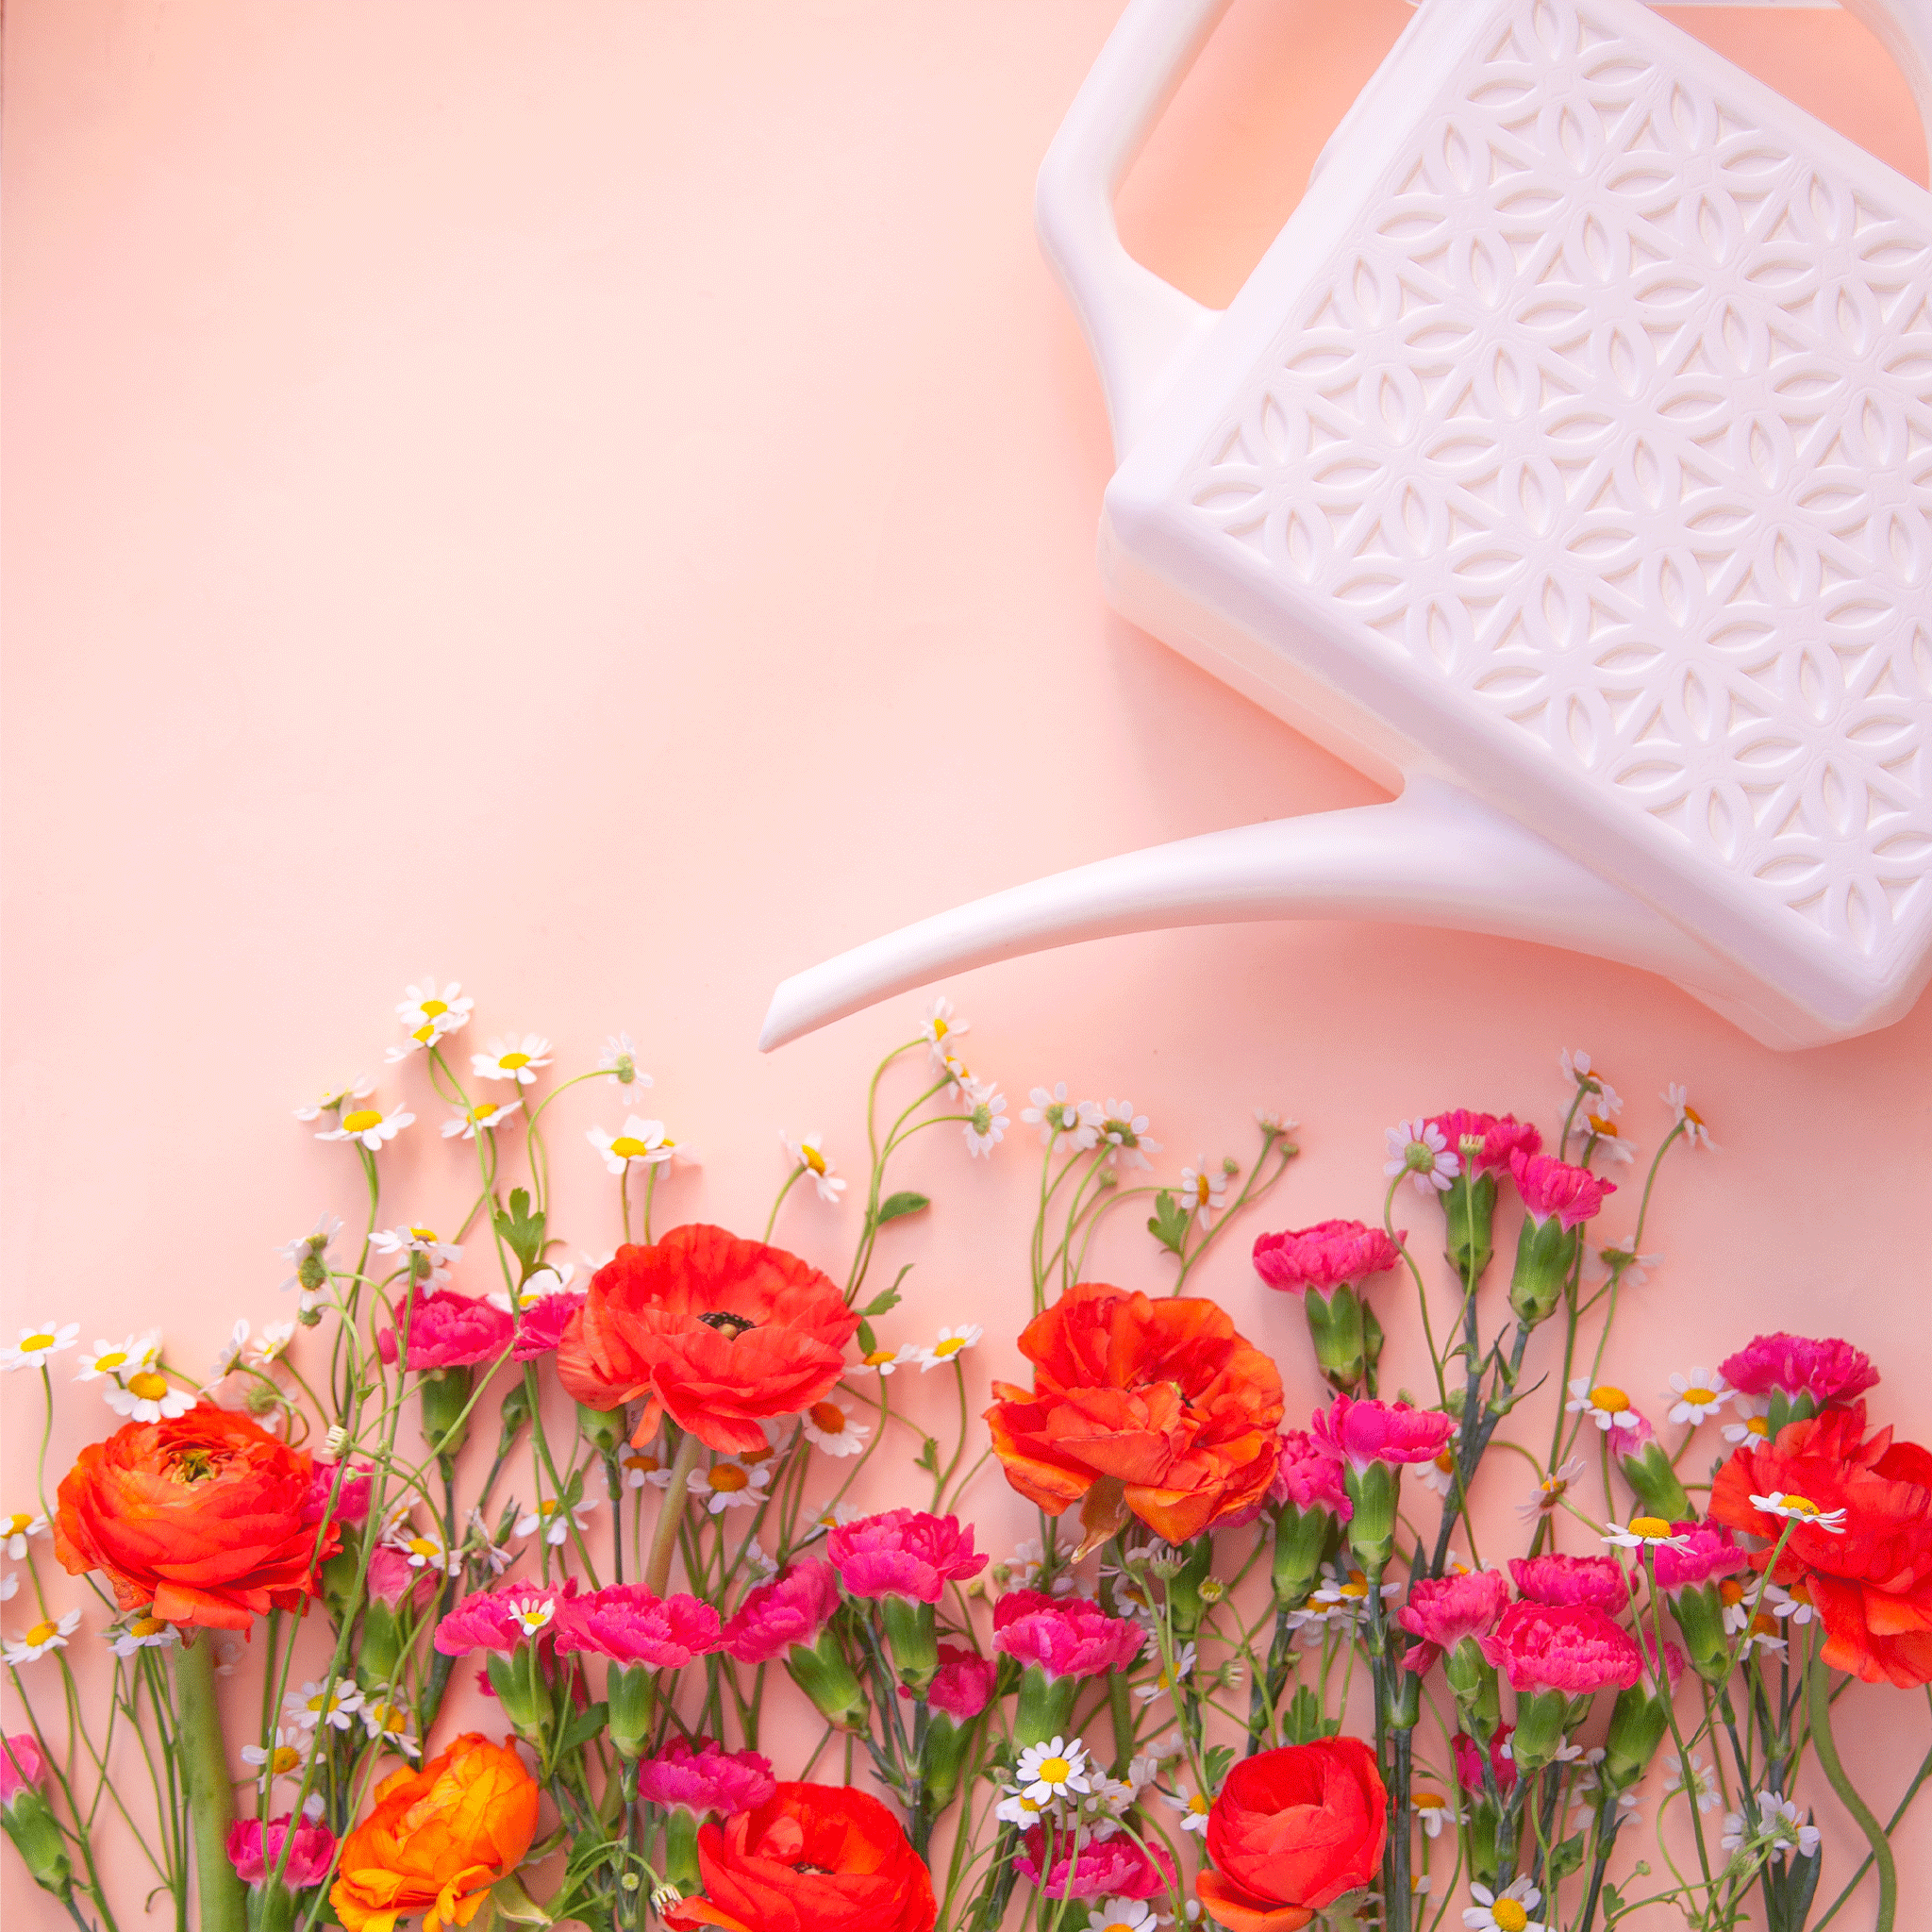 On a light pink background is a white watering can with a long spout and a breeze block design on the side.